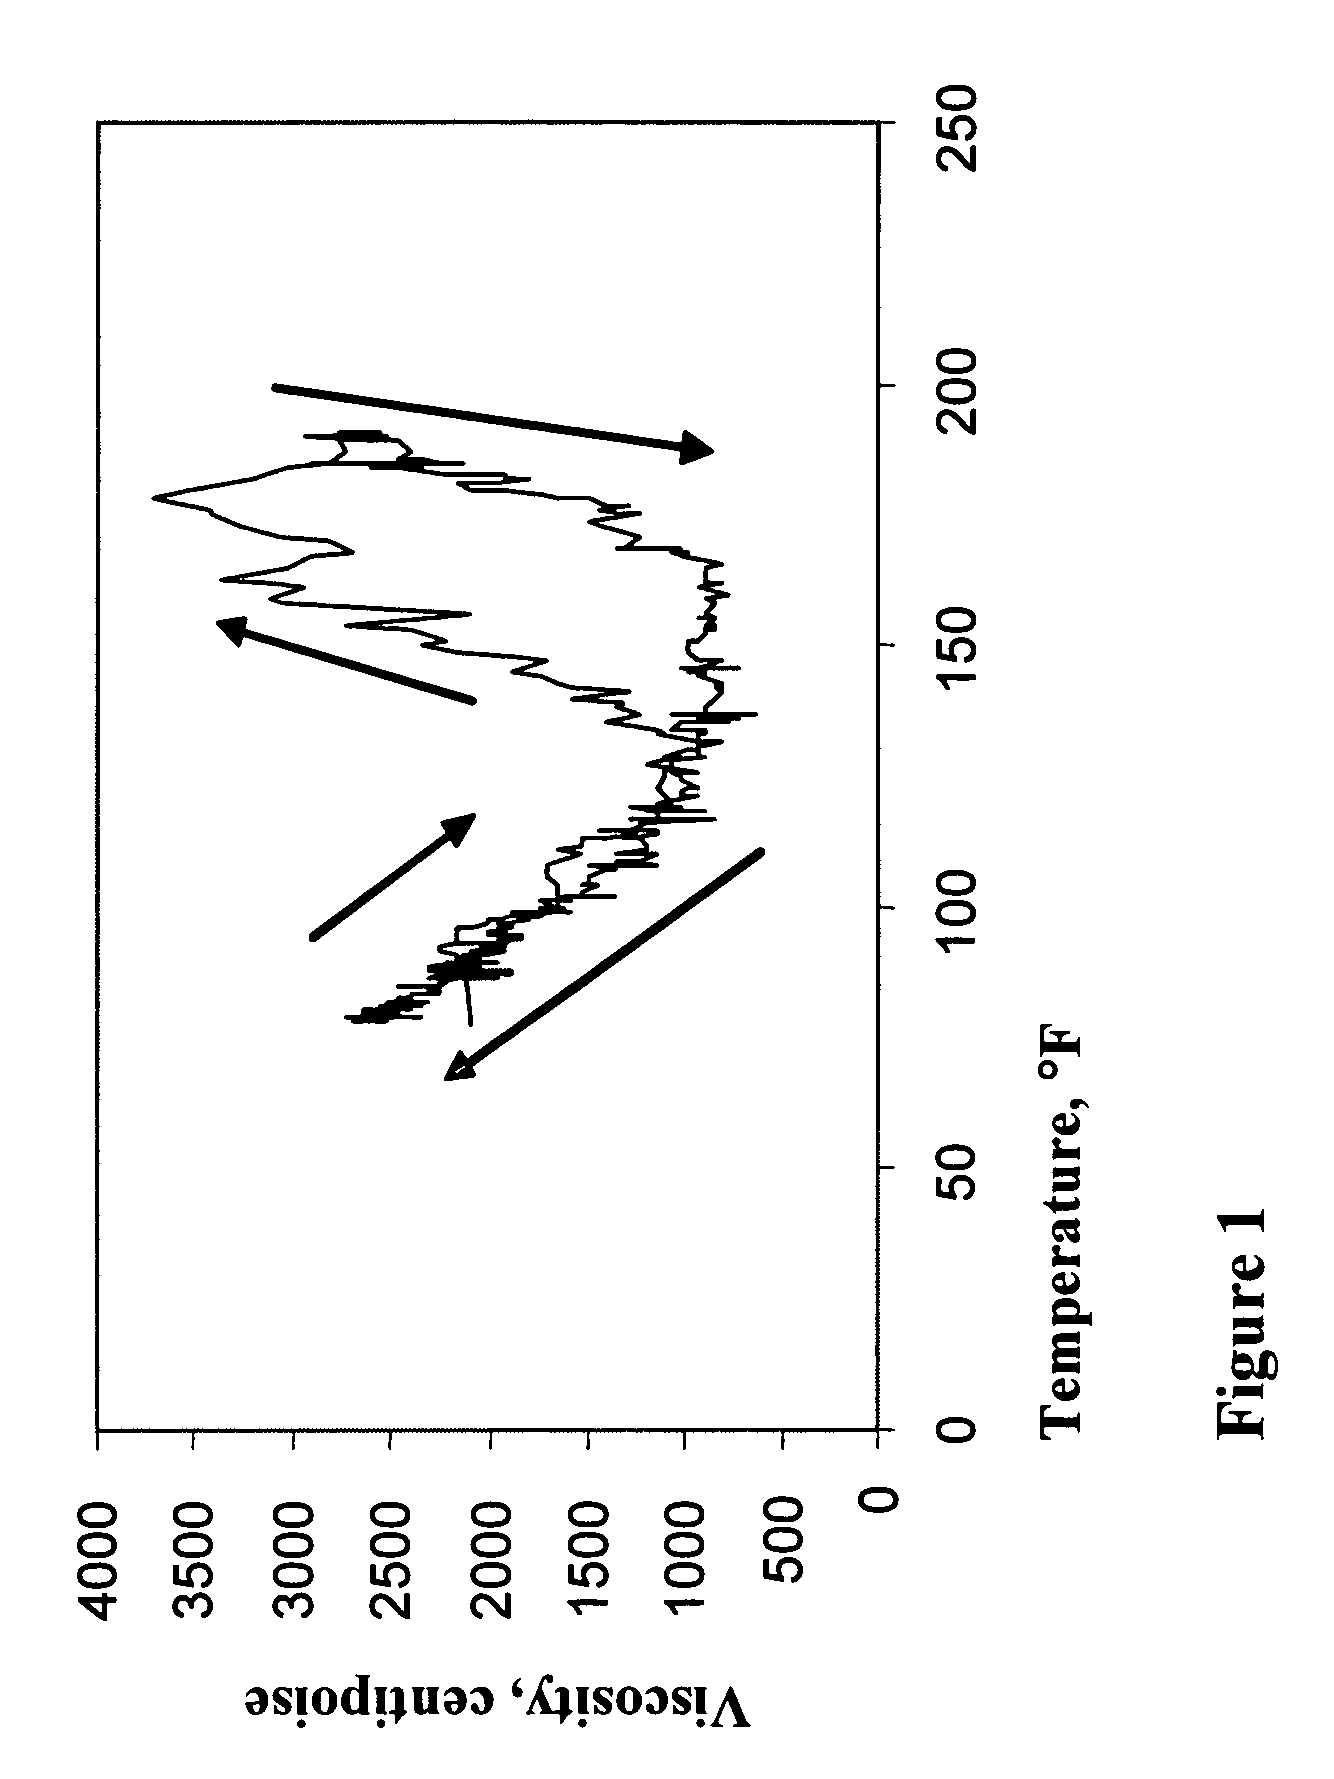 Well bore servicing fluids comprising thermally activated viscosification compounds and methods of using the same